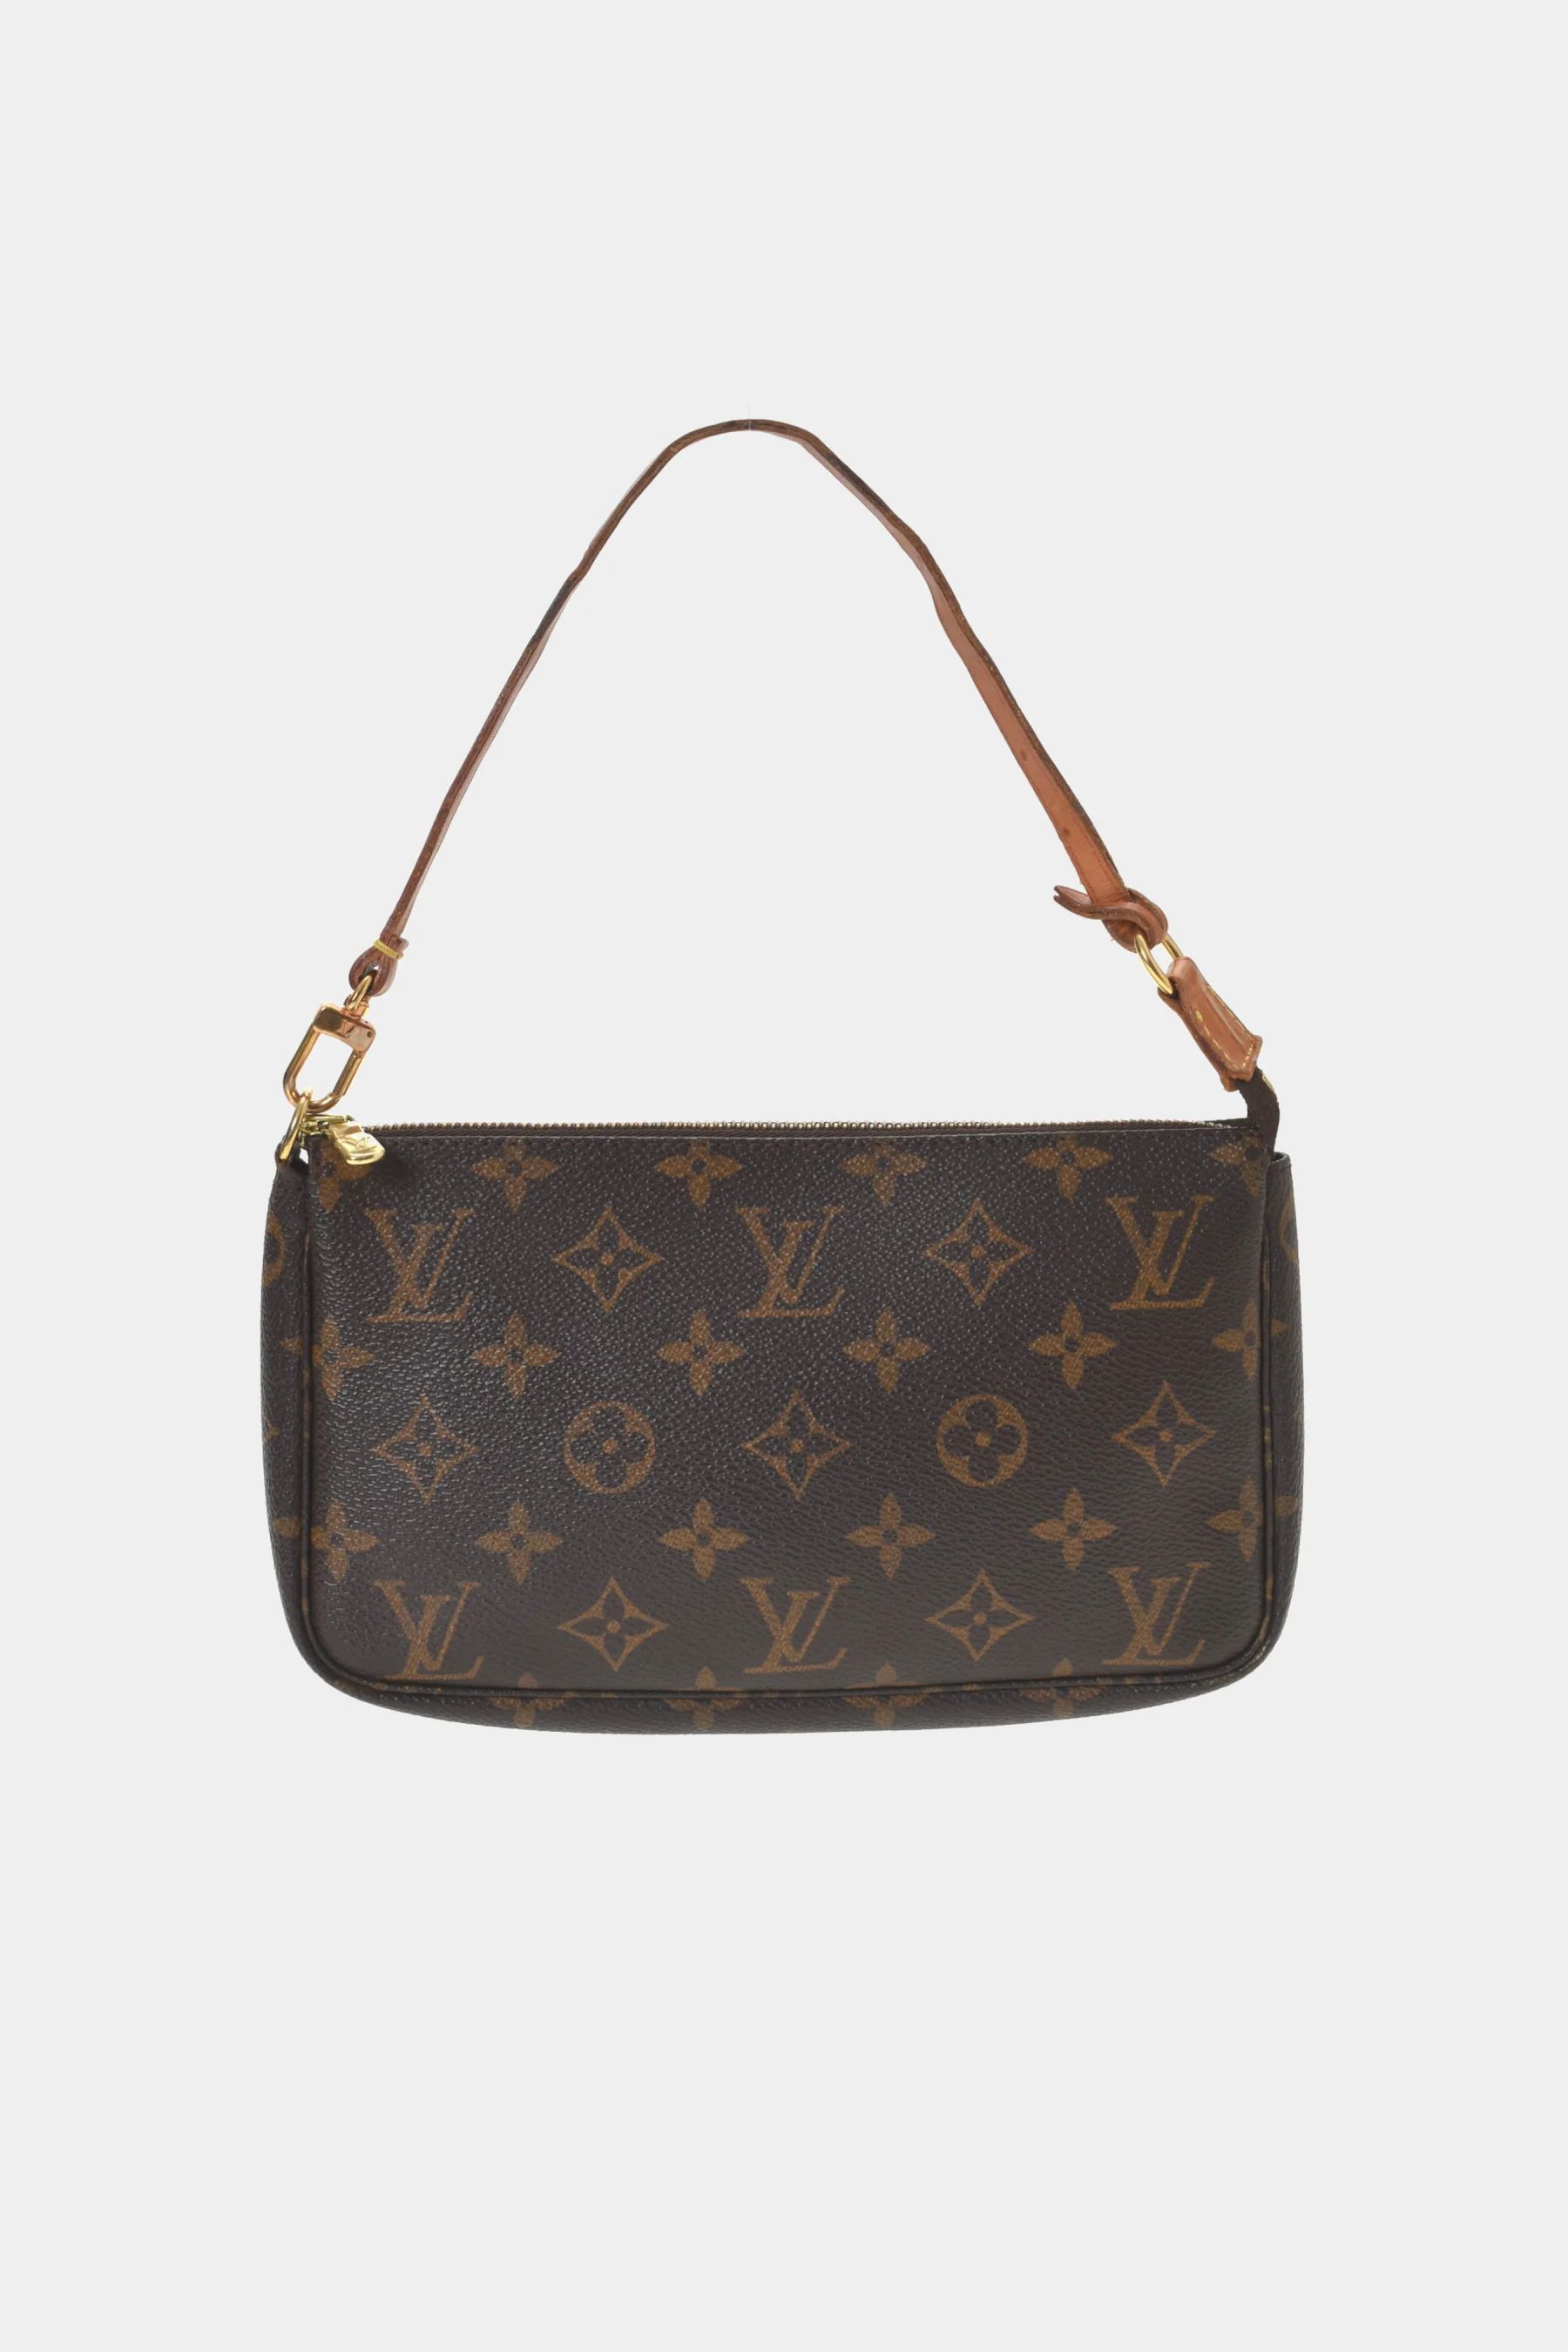 Louis Vuitton Pochette in Brown Lord & Taylor | Lord & Taylor